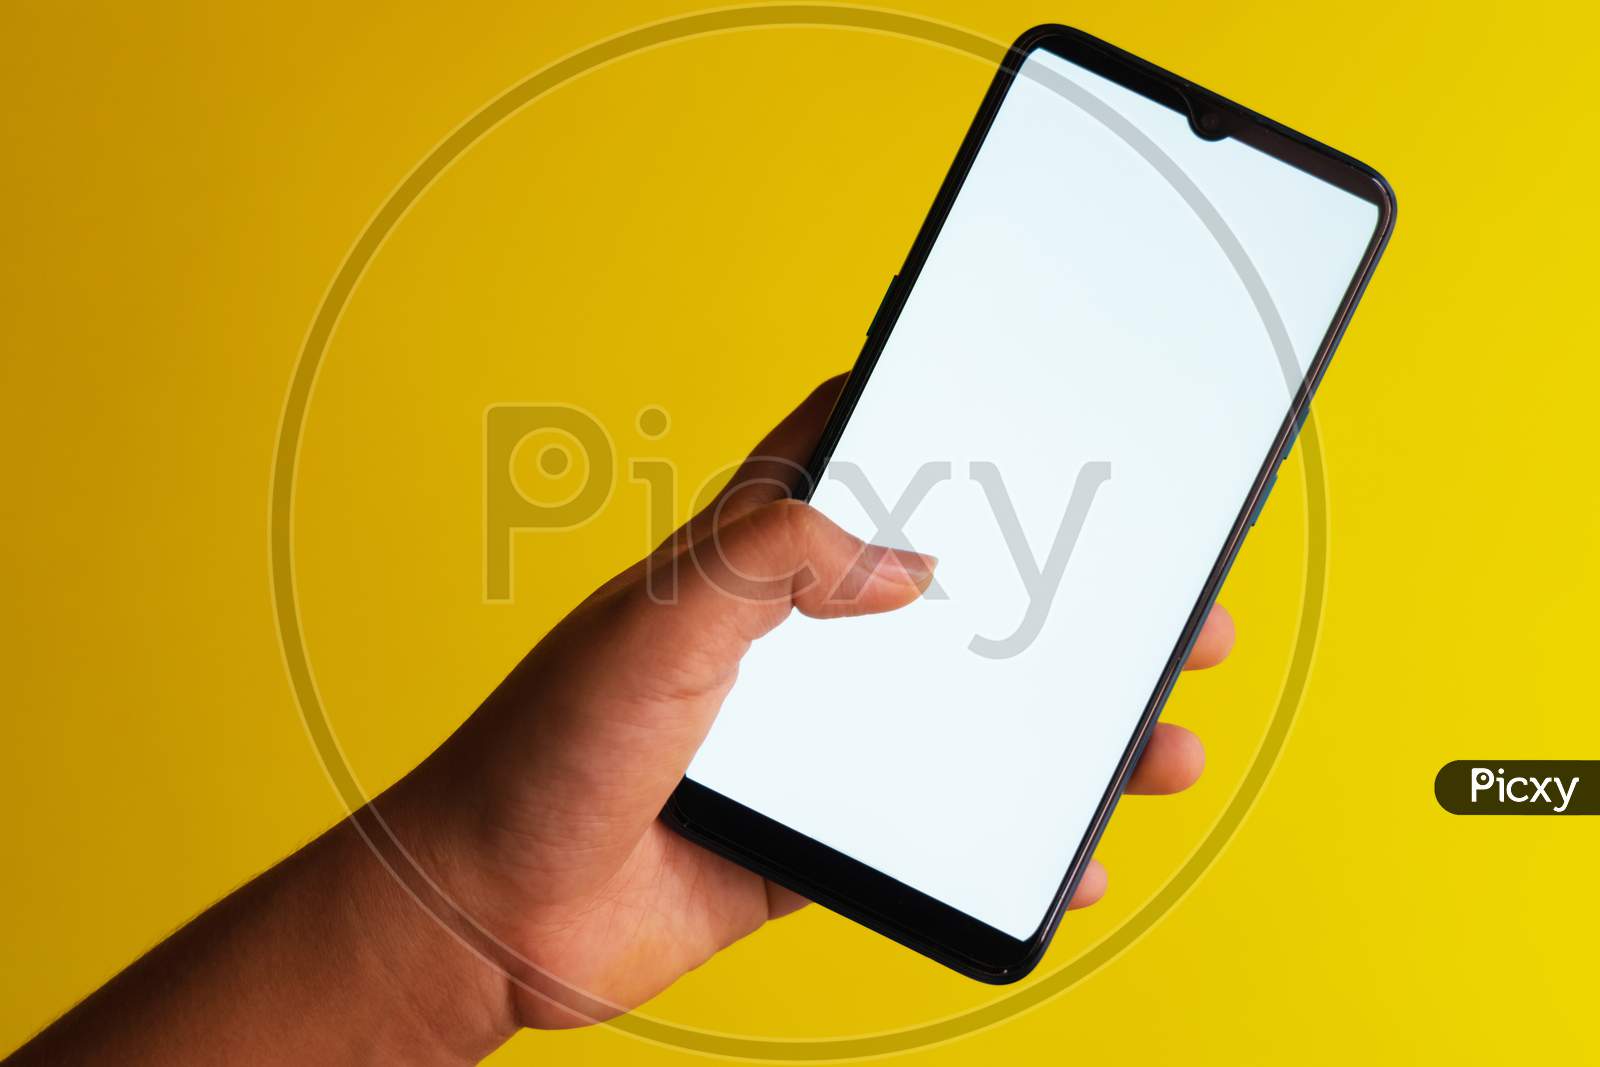 Finger tapping on a smartphone with white screen held against a plain yellow background with copy space